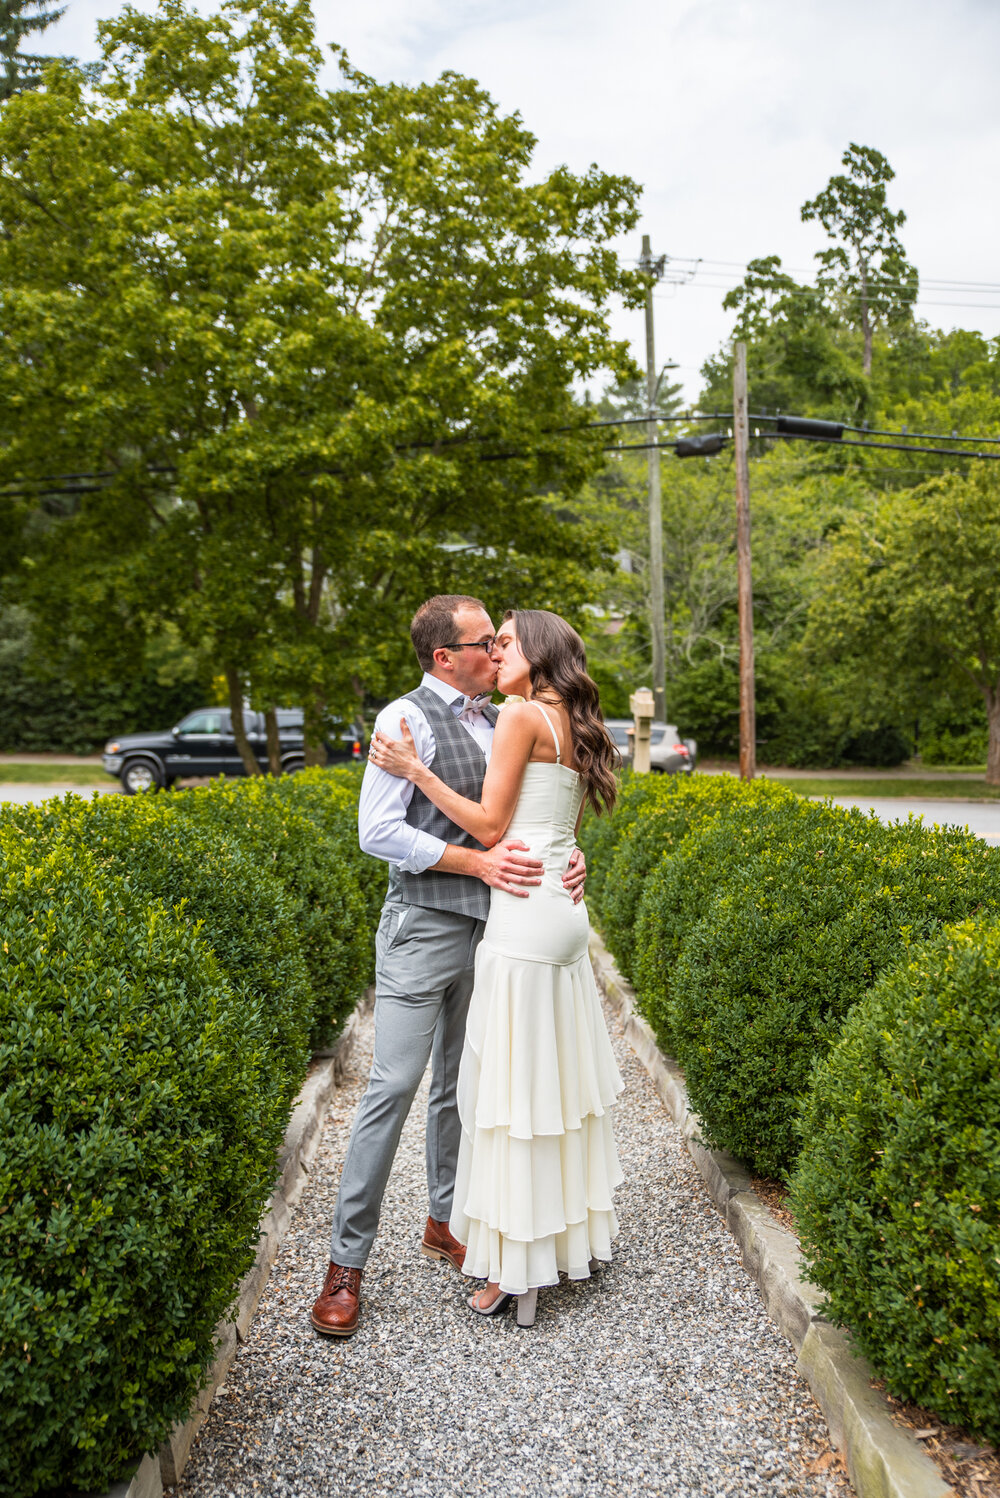 Wedding Kiss at Inn on Montford by Nick Levine Photography, local Asheville wedding photographer